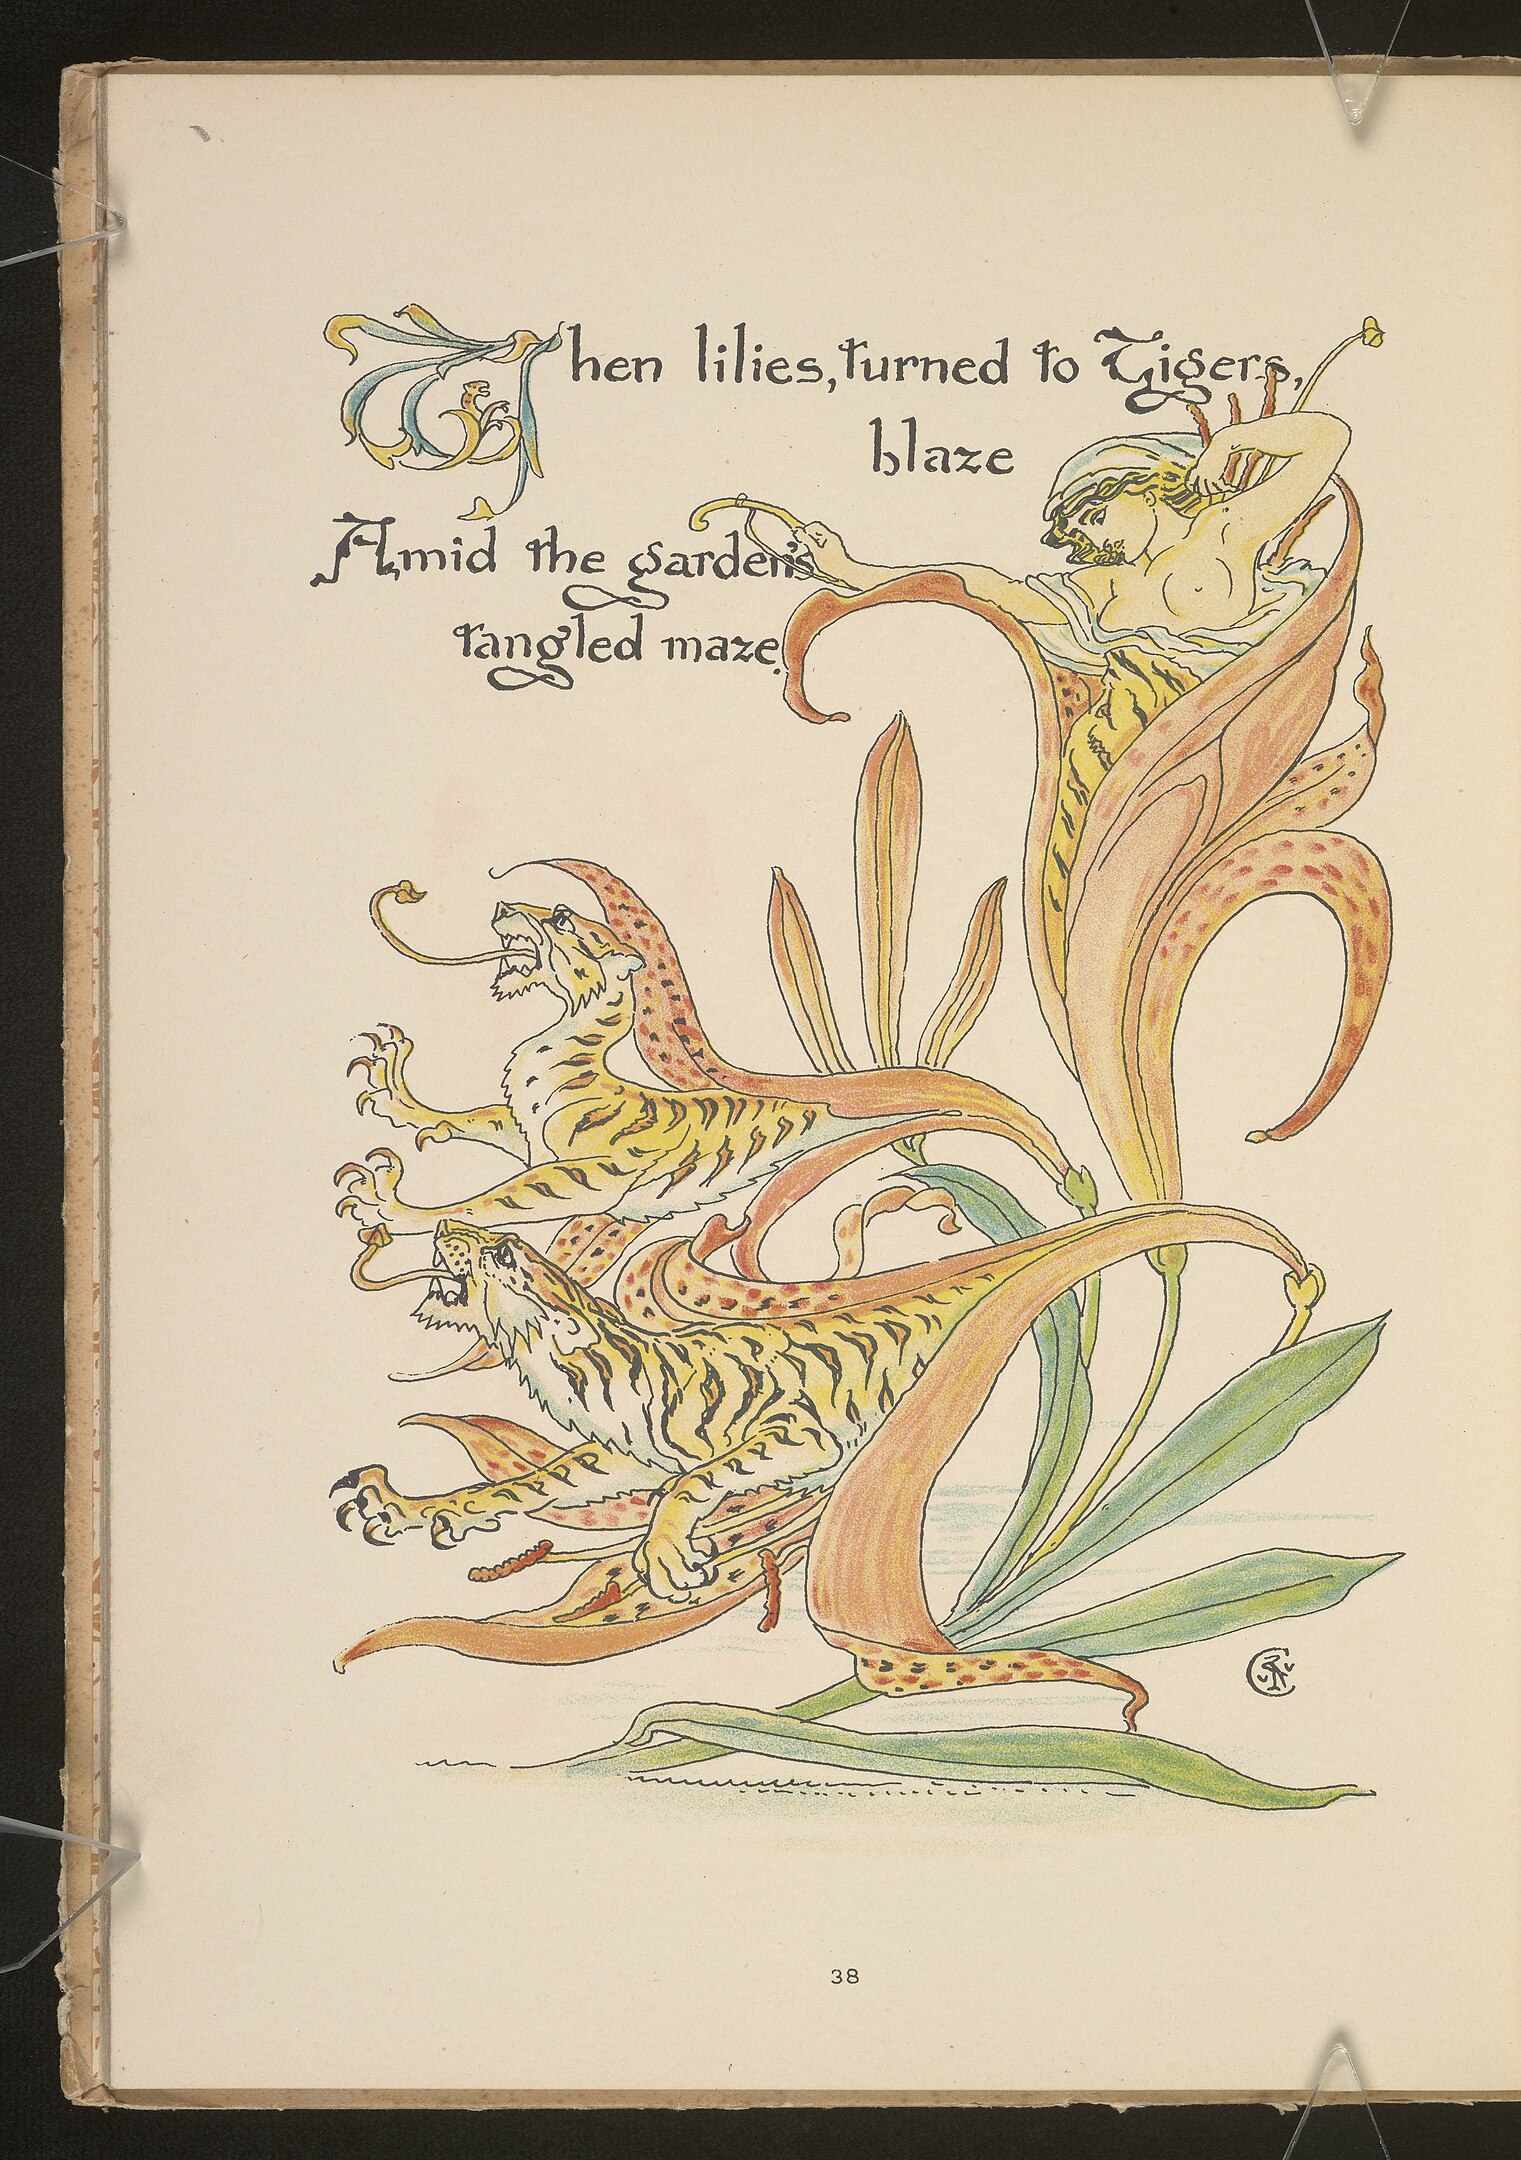 An illustration of two tigers and a woman emerging out of lilies